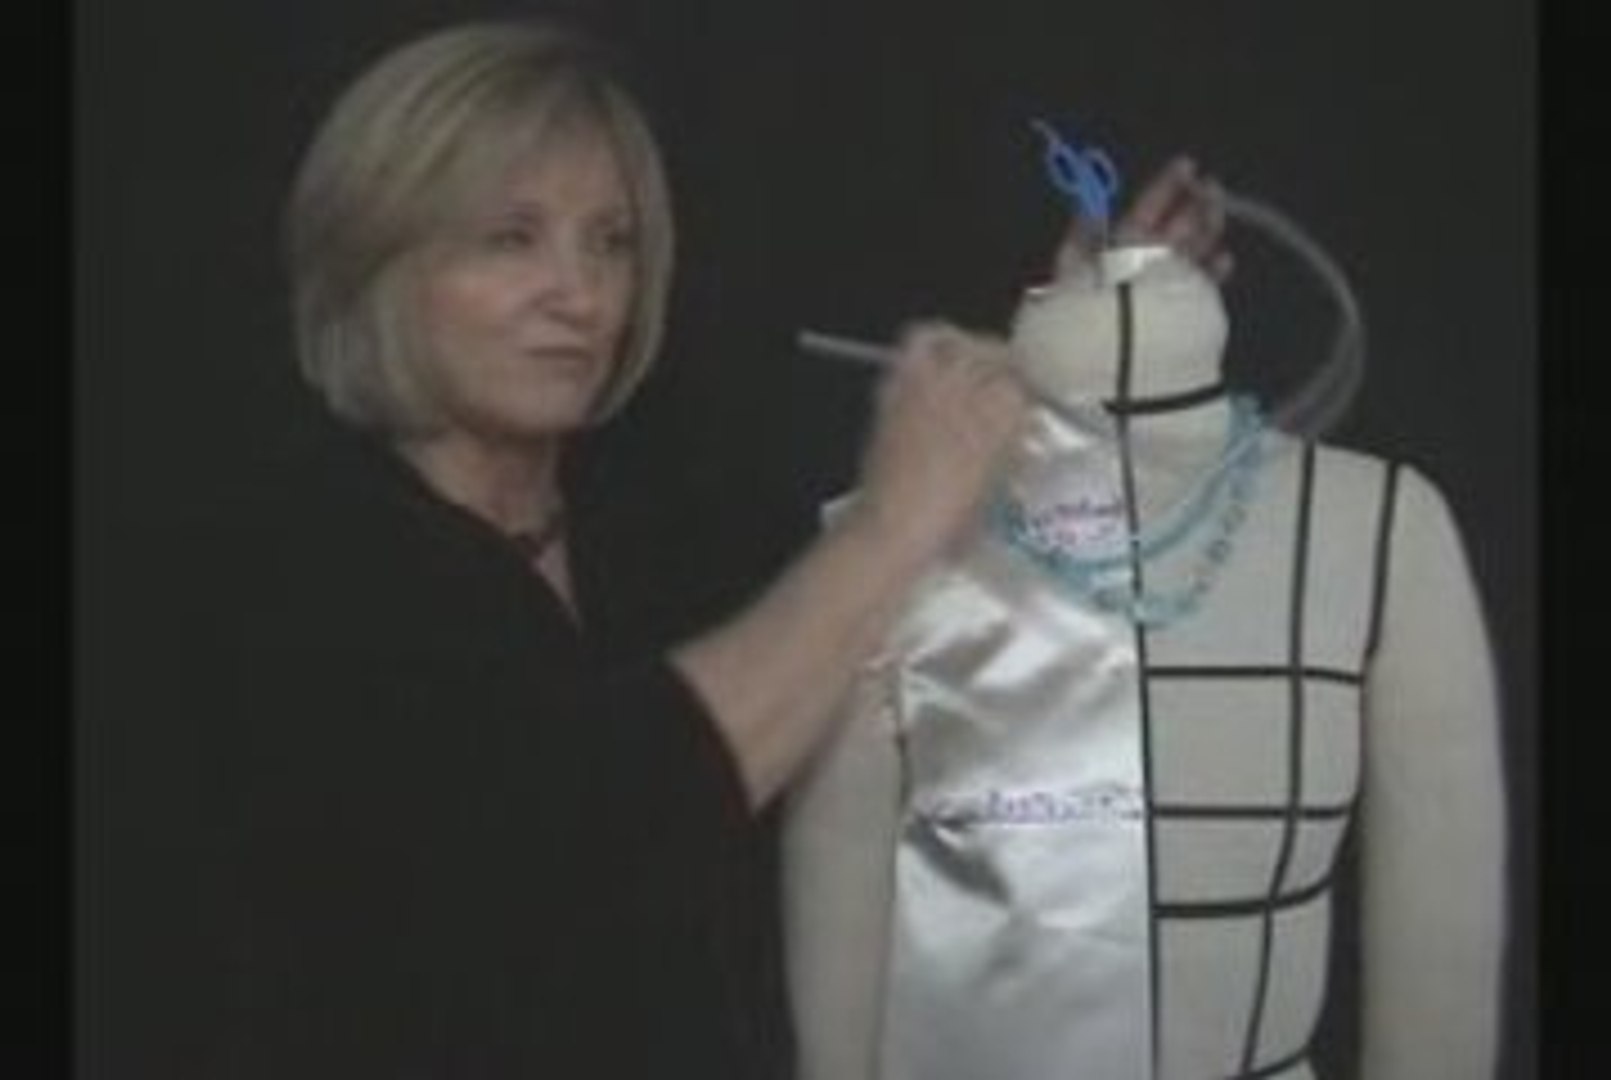 Fashion Design Courses-Sewing and Pattern Drafting Lessons